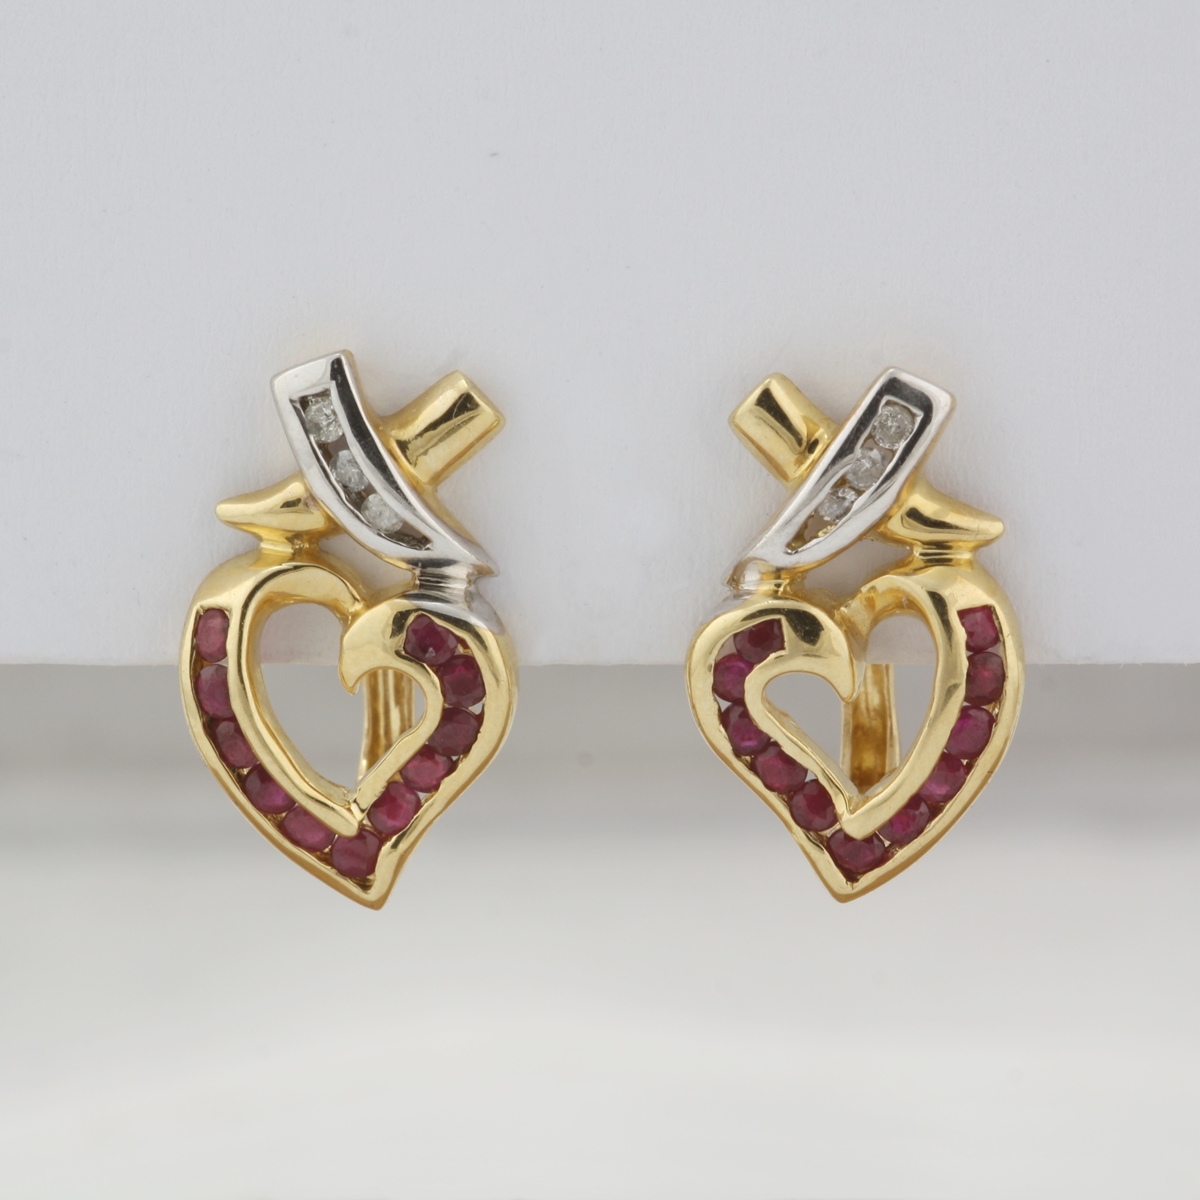 Pre-Owned 14 Karat Yellow and White Gold "X" and Heart Earrings